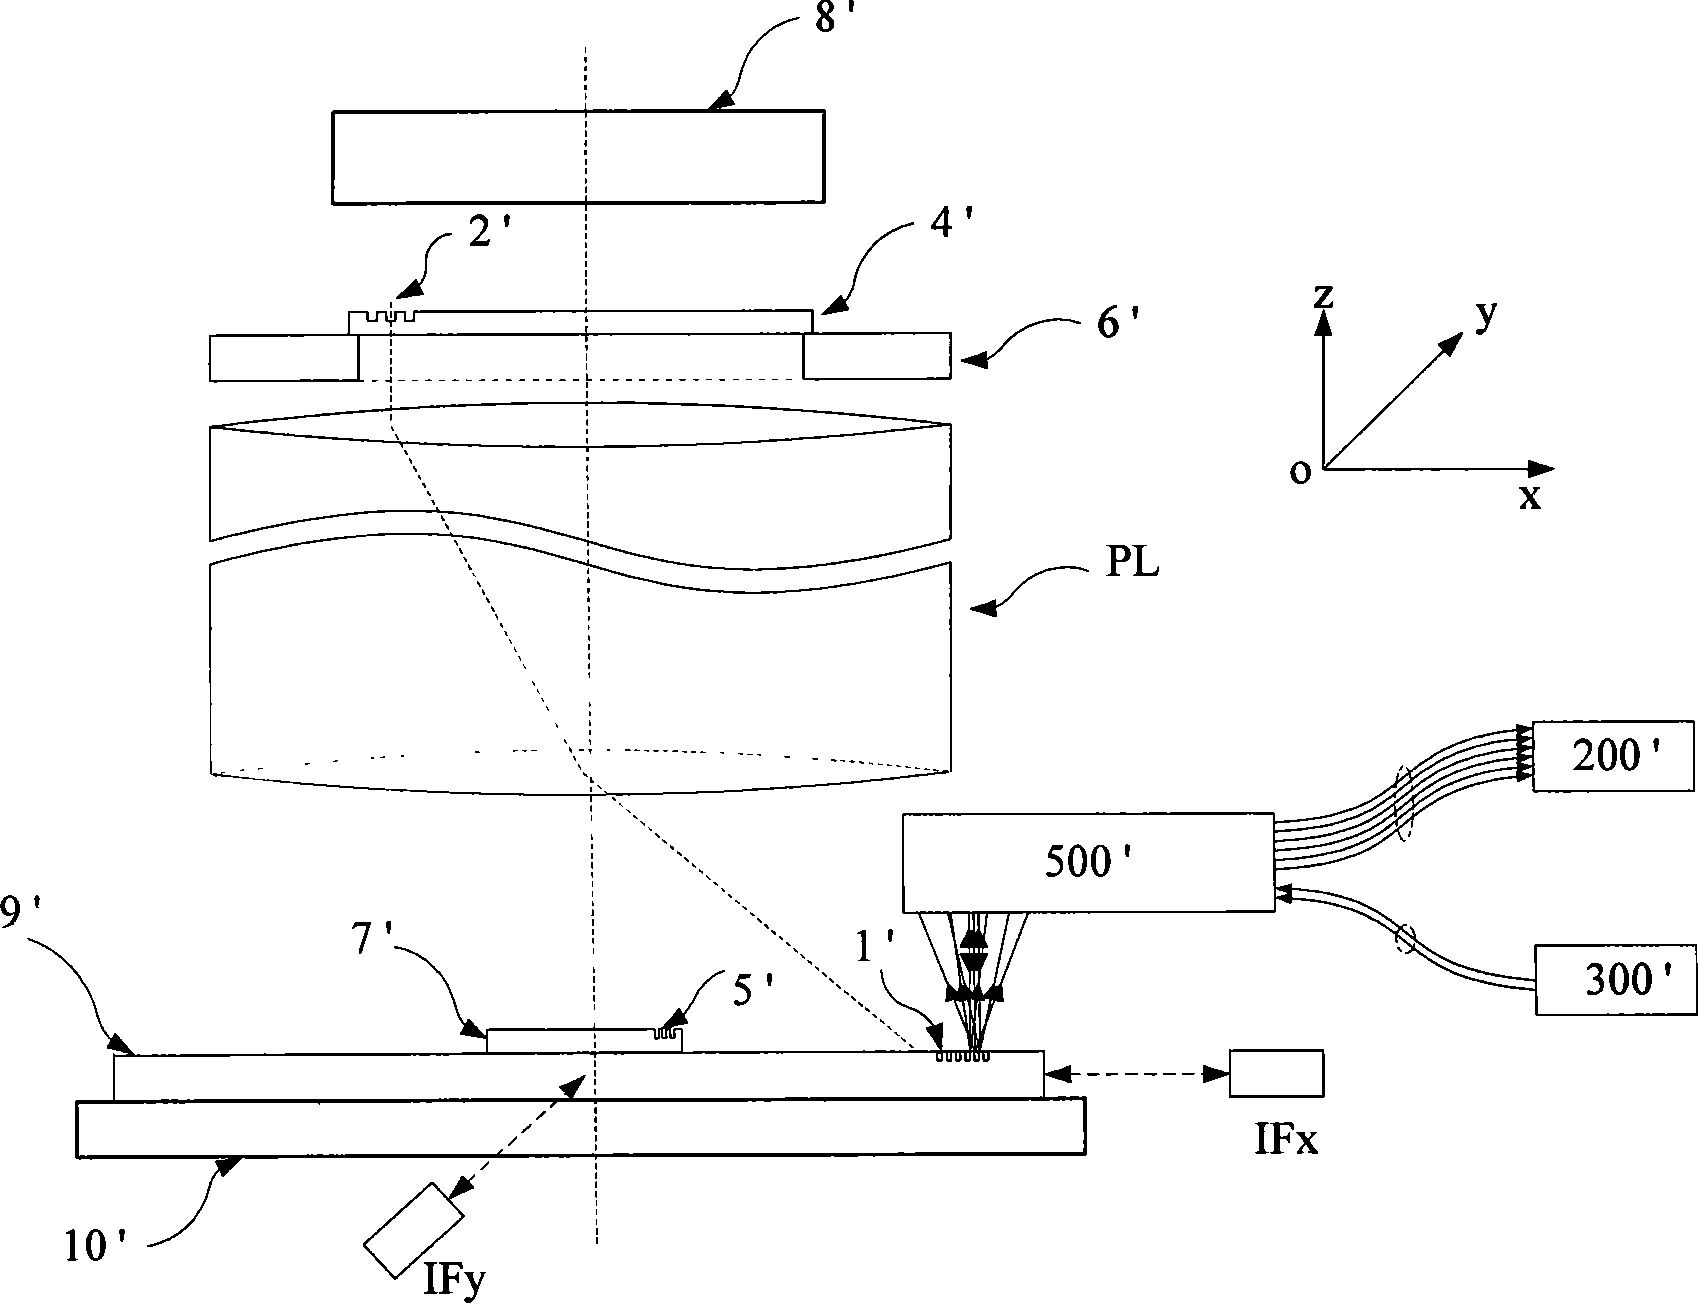 Lithographic equipment aligning system based on machine vision and alignment method